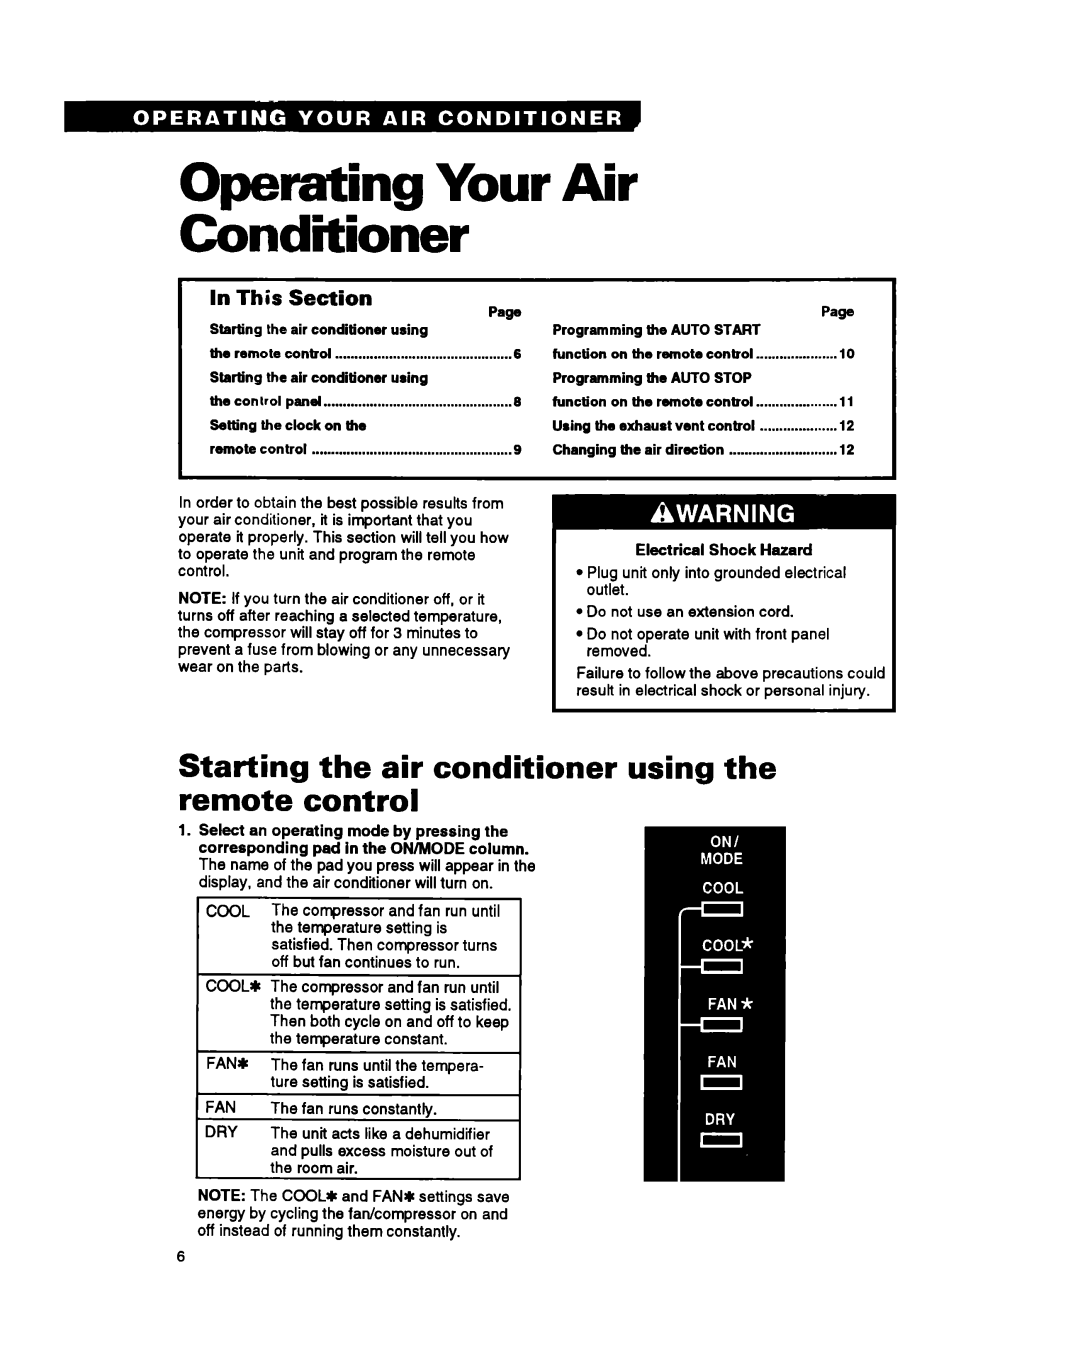 Whirlpool ACXO82XZO warranty Operating Your Air Conditioner, Section, Page 